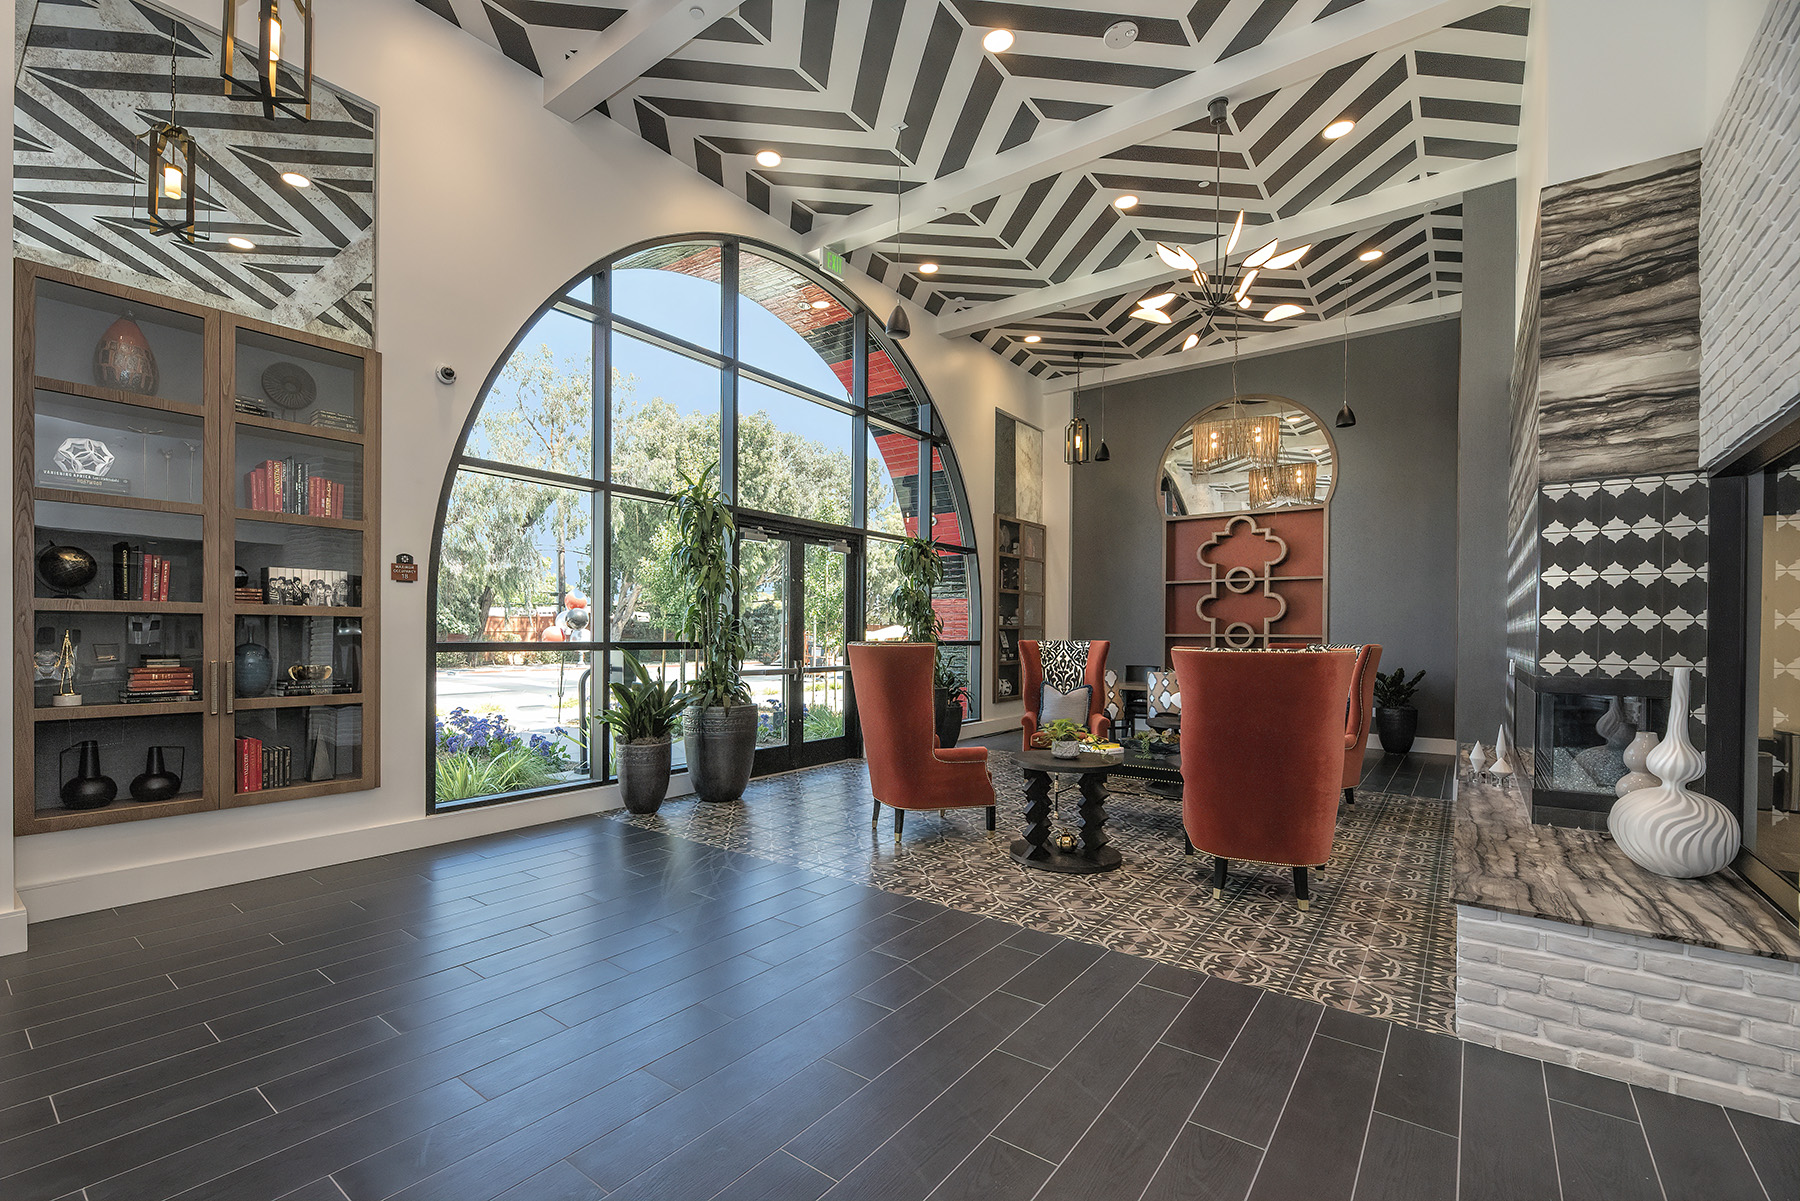 One-Bedroom Apartments in San Mateo, CA - Azara - Lobby with Vaulted Ceilings, Two-Toned Floors, Area Rug with Seating Area, and Built-In Cabinets.